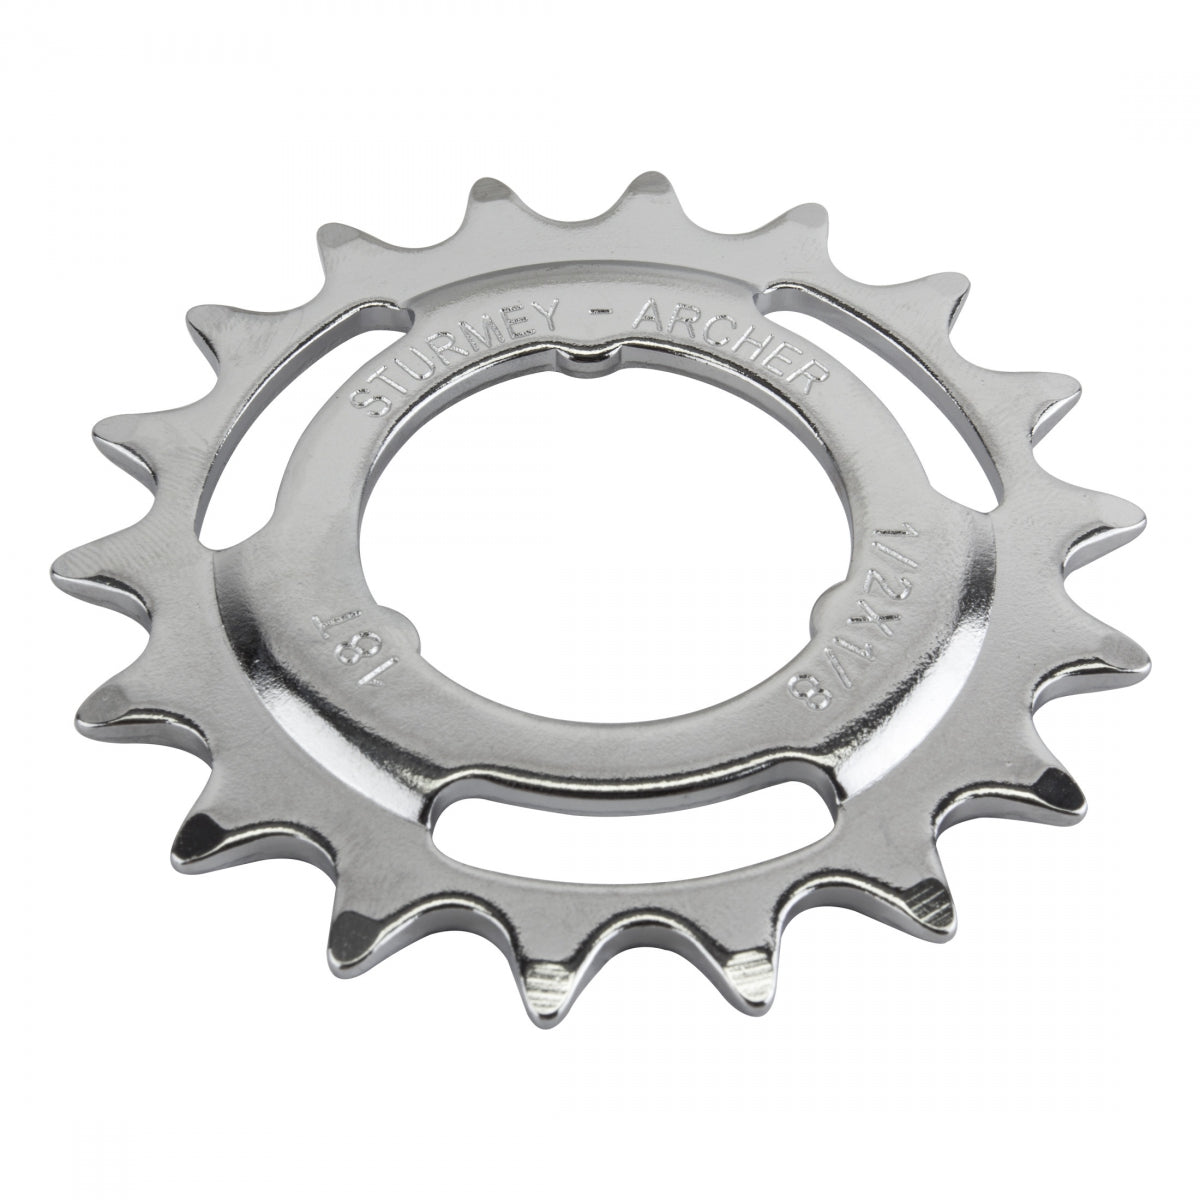 Hub Part S/A Hsl-838 Sprocket Dished 18T 1/8 Chrome Plated